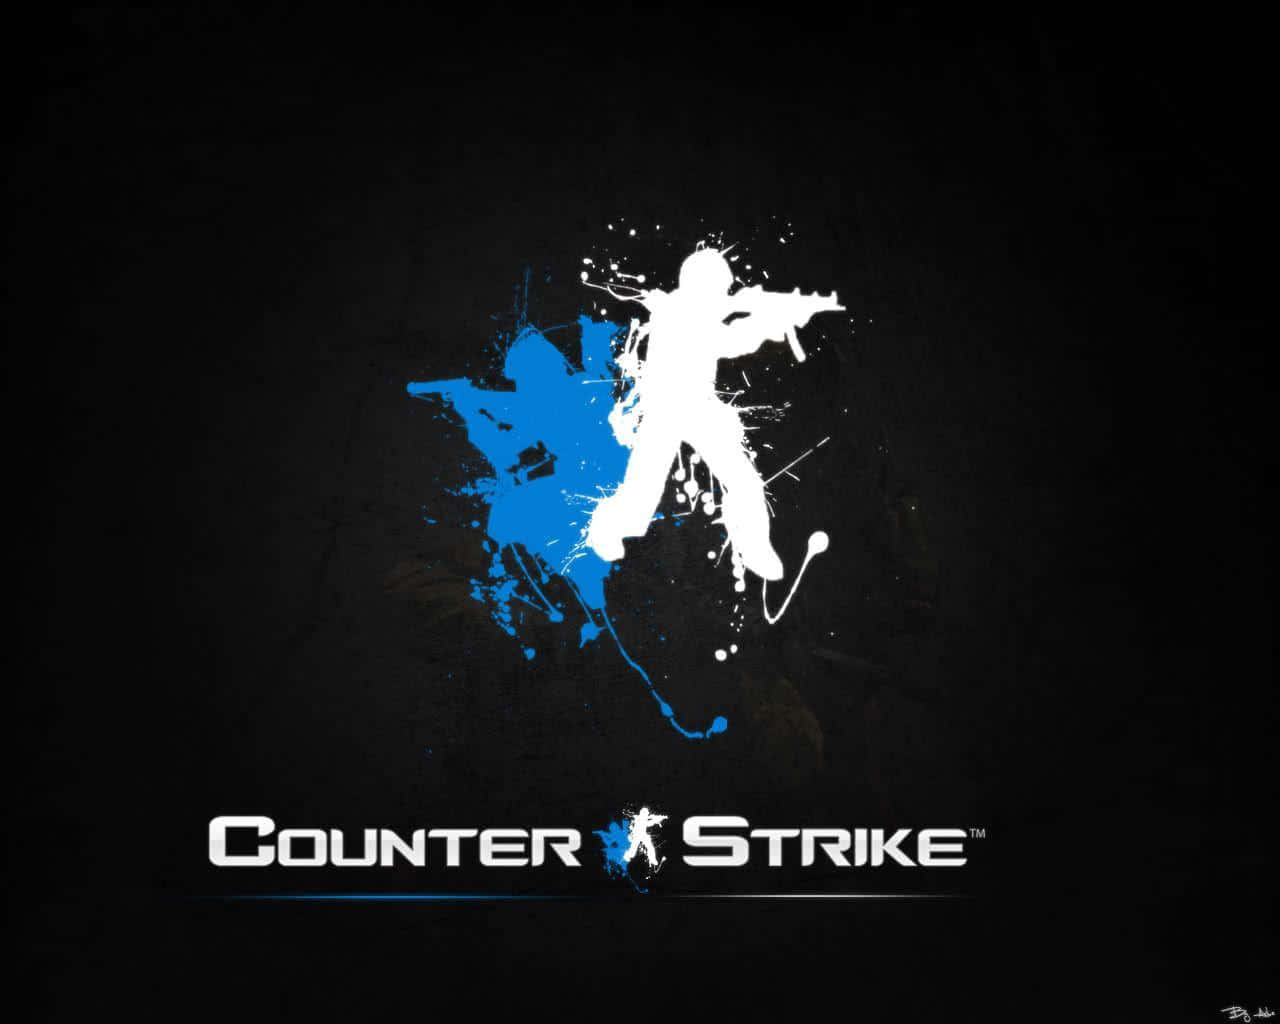 Counterstrike - Aim For Victory! Wallpaper